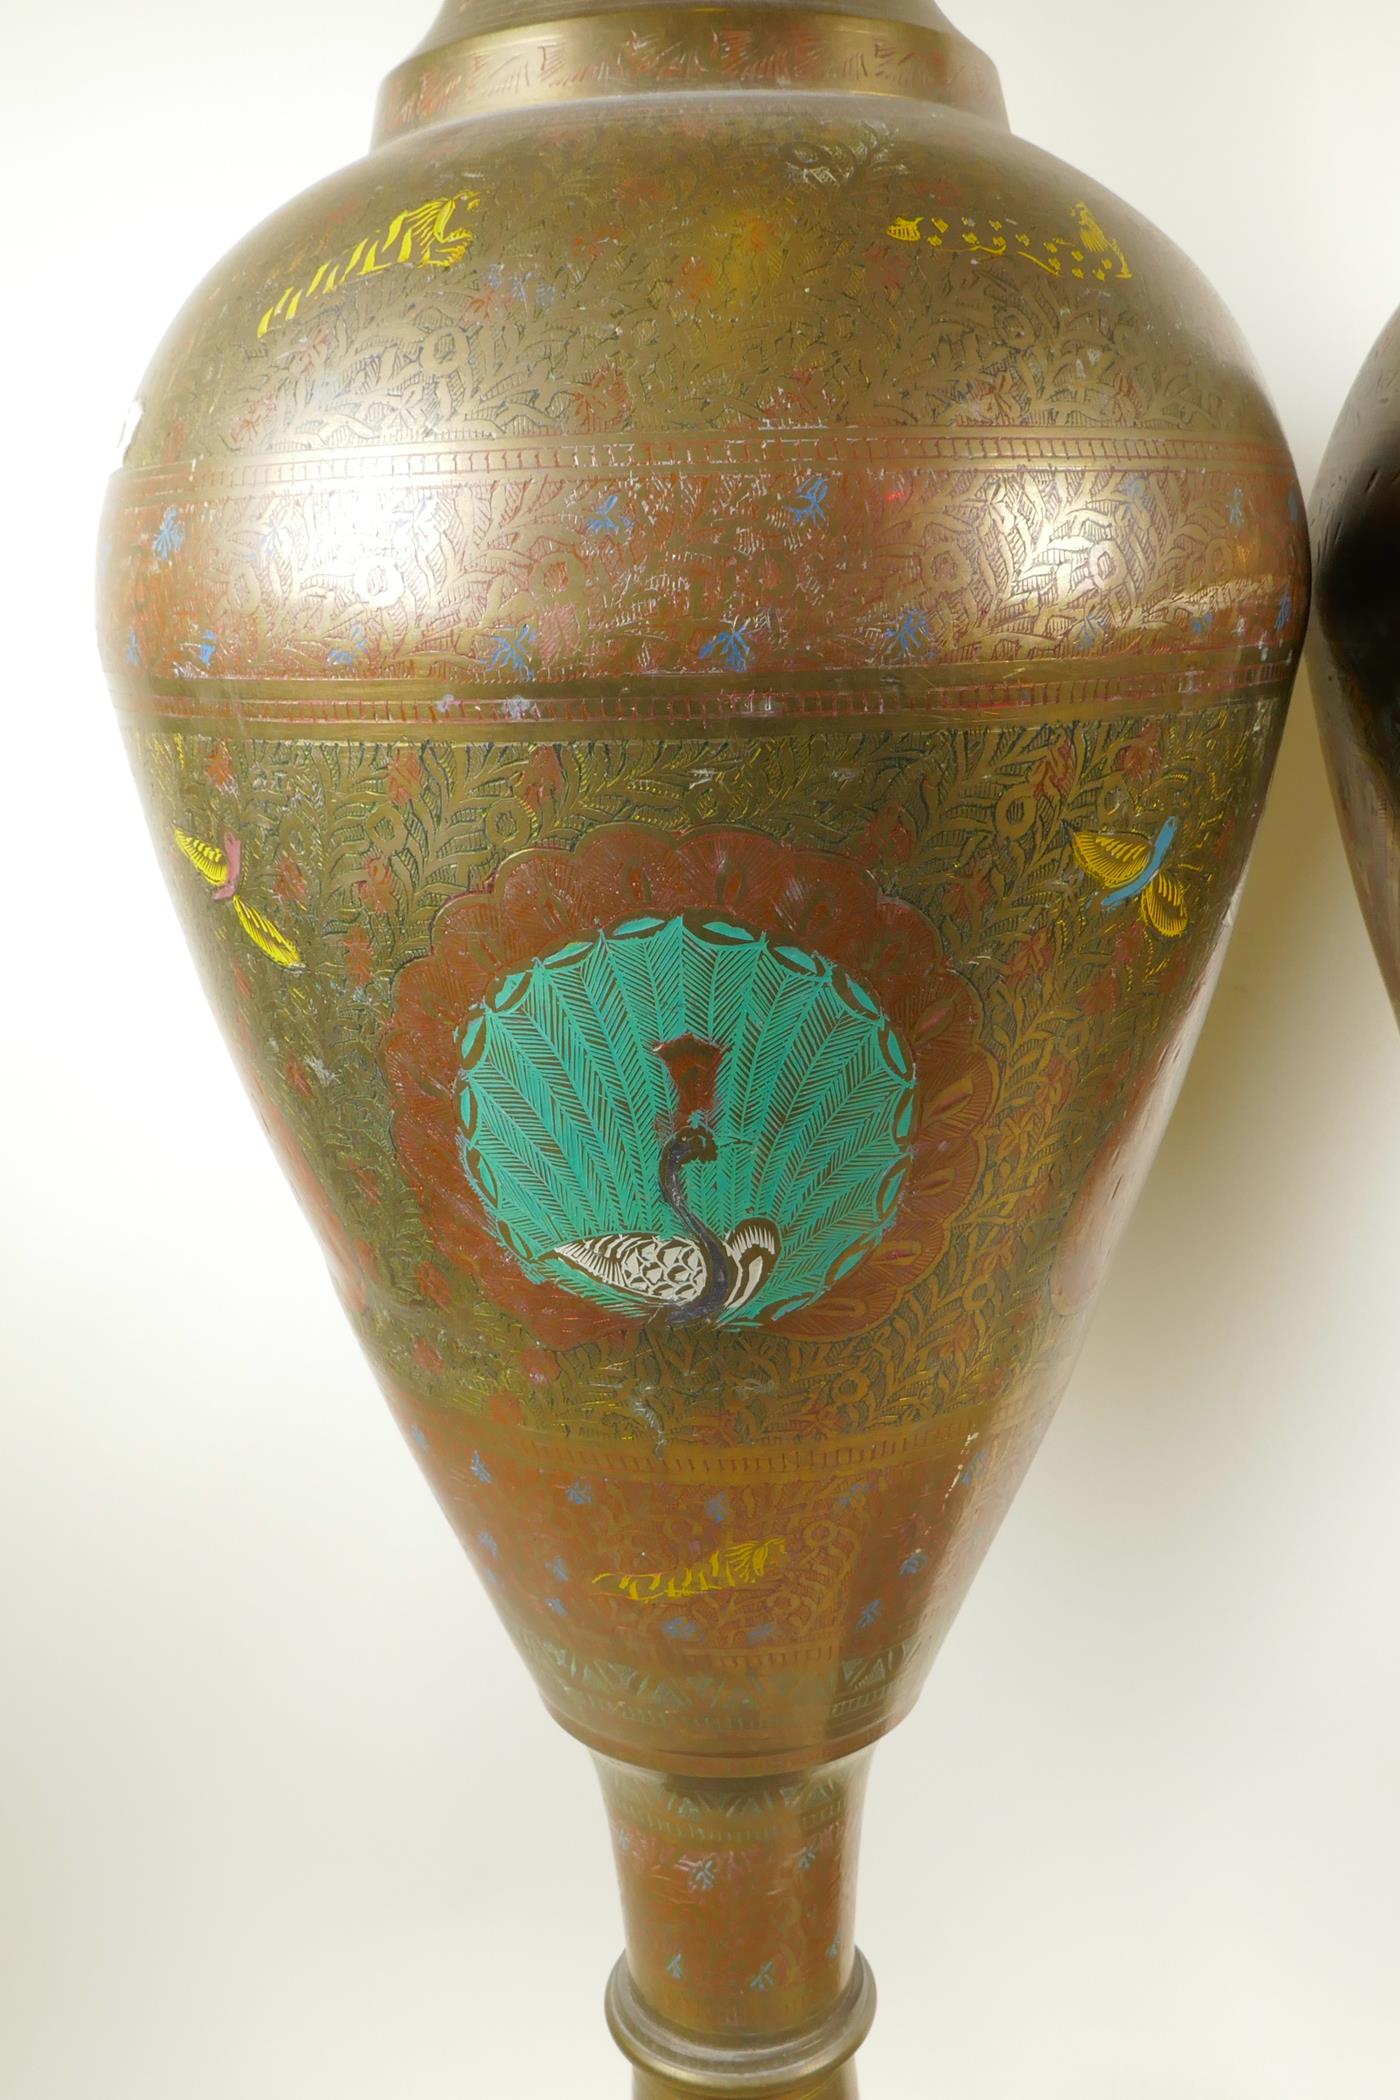 A pair of large Indian brass floor vases with engraved and painted decoration depicting peacocks, - Image 9 of 9